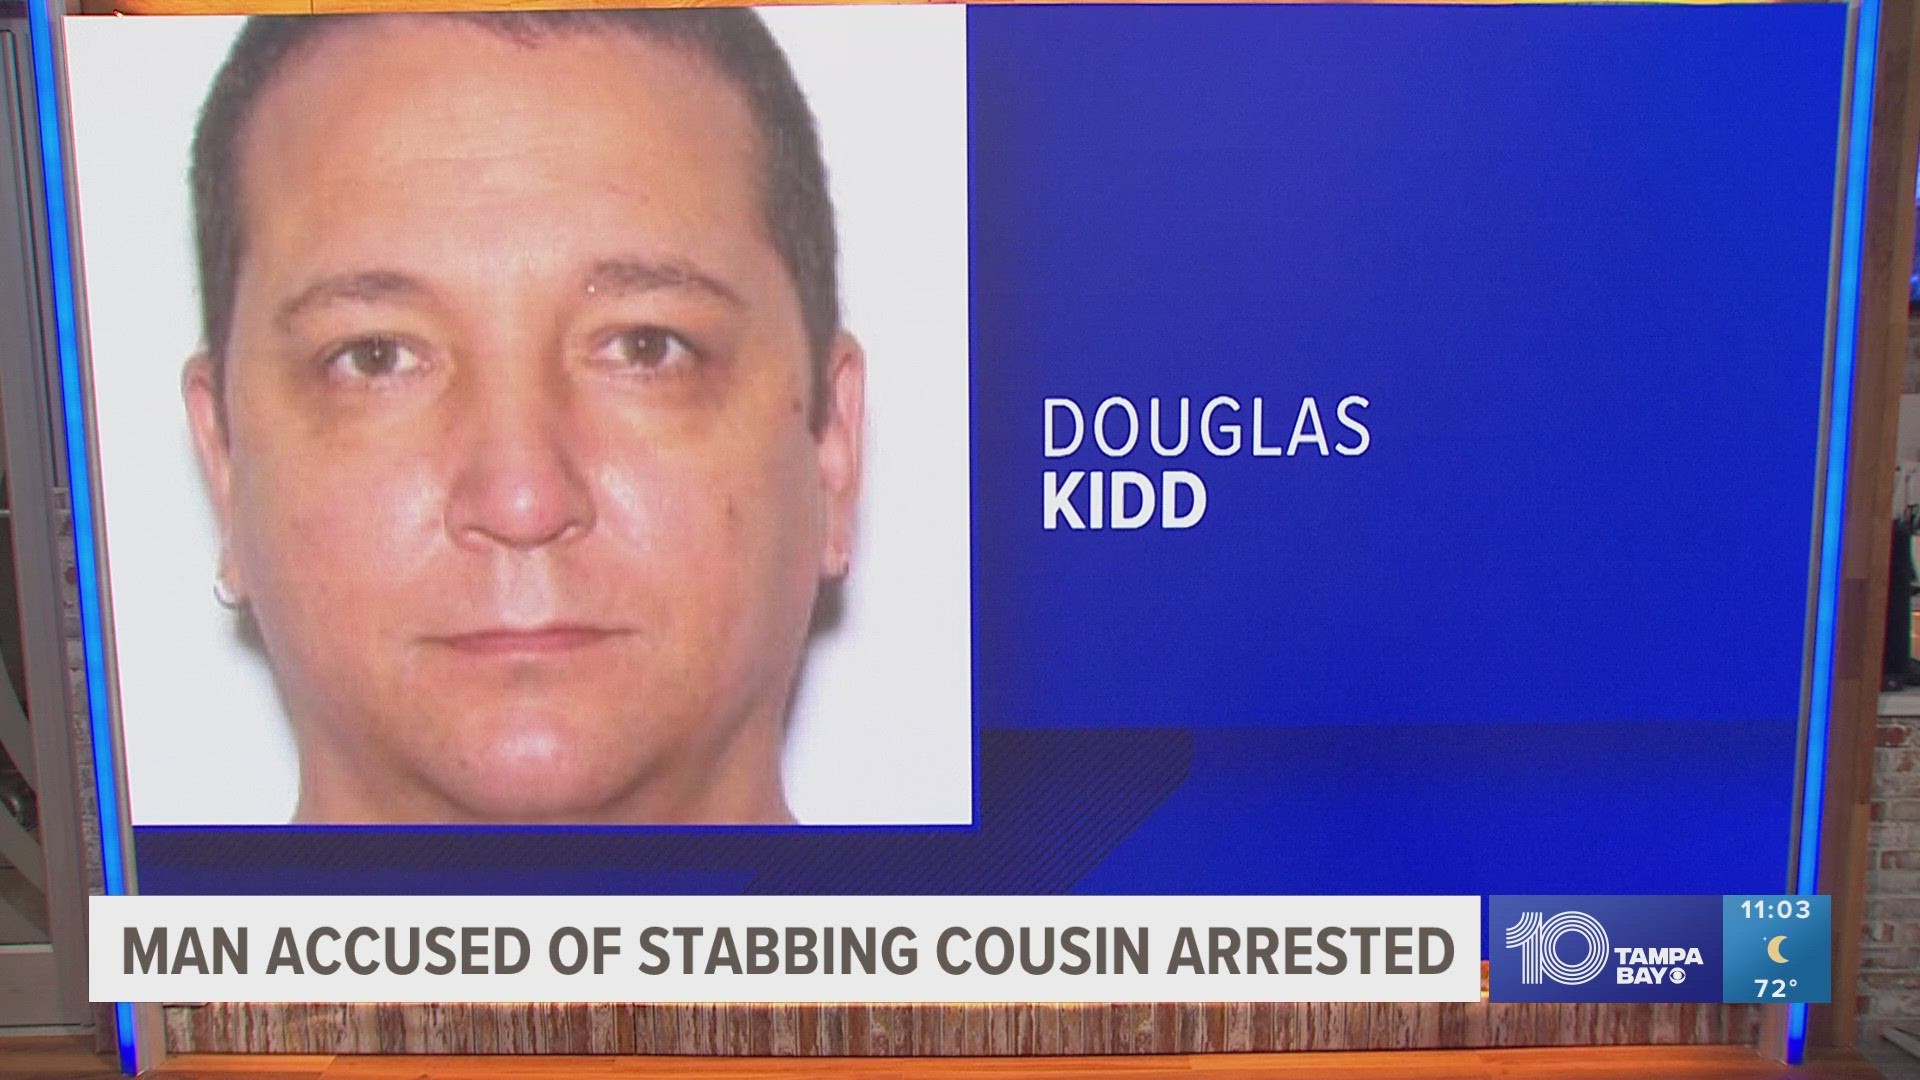 Douglas Kidd is accused of "violently" stabbing his cousin more than 15 times. It was a "miracle" she survived, police said.